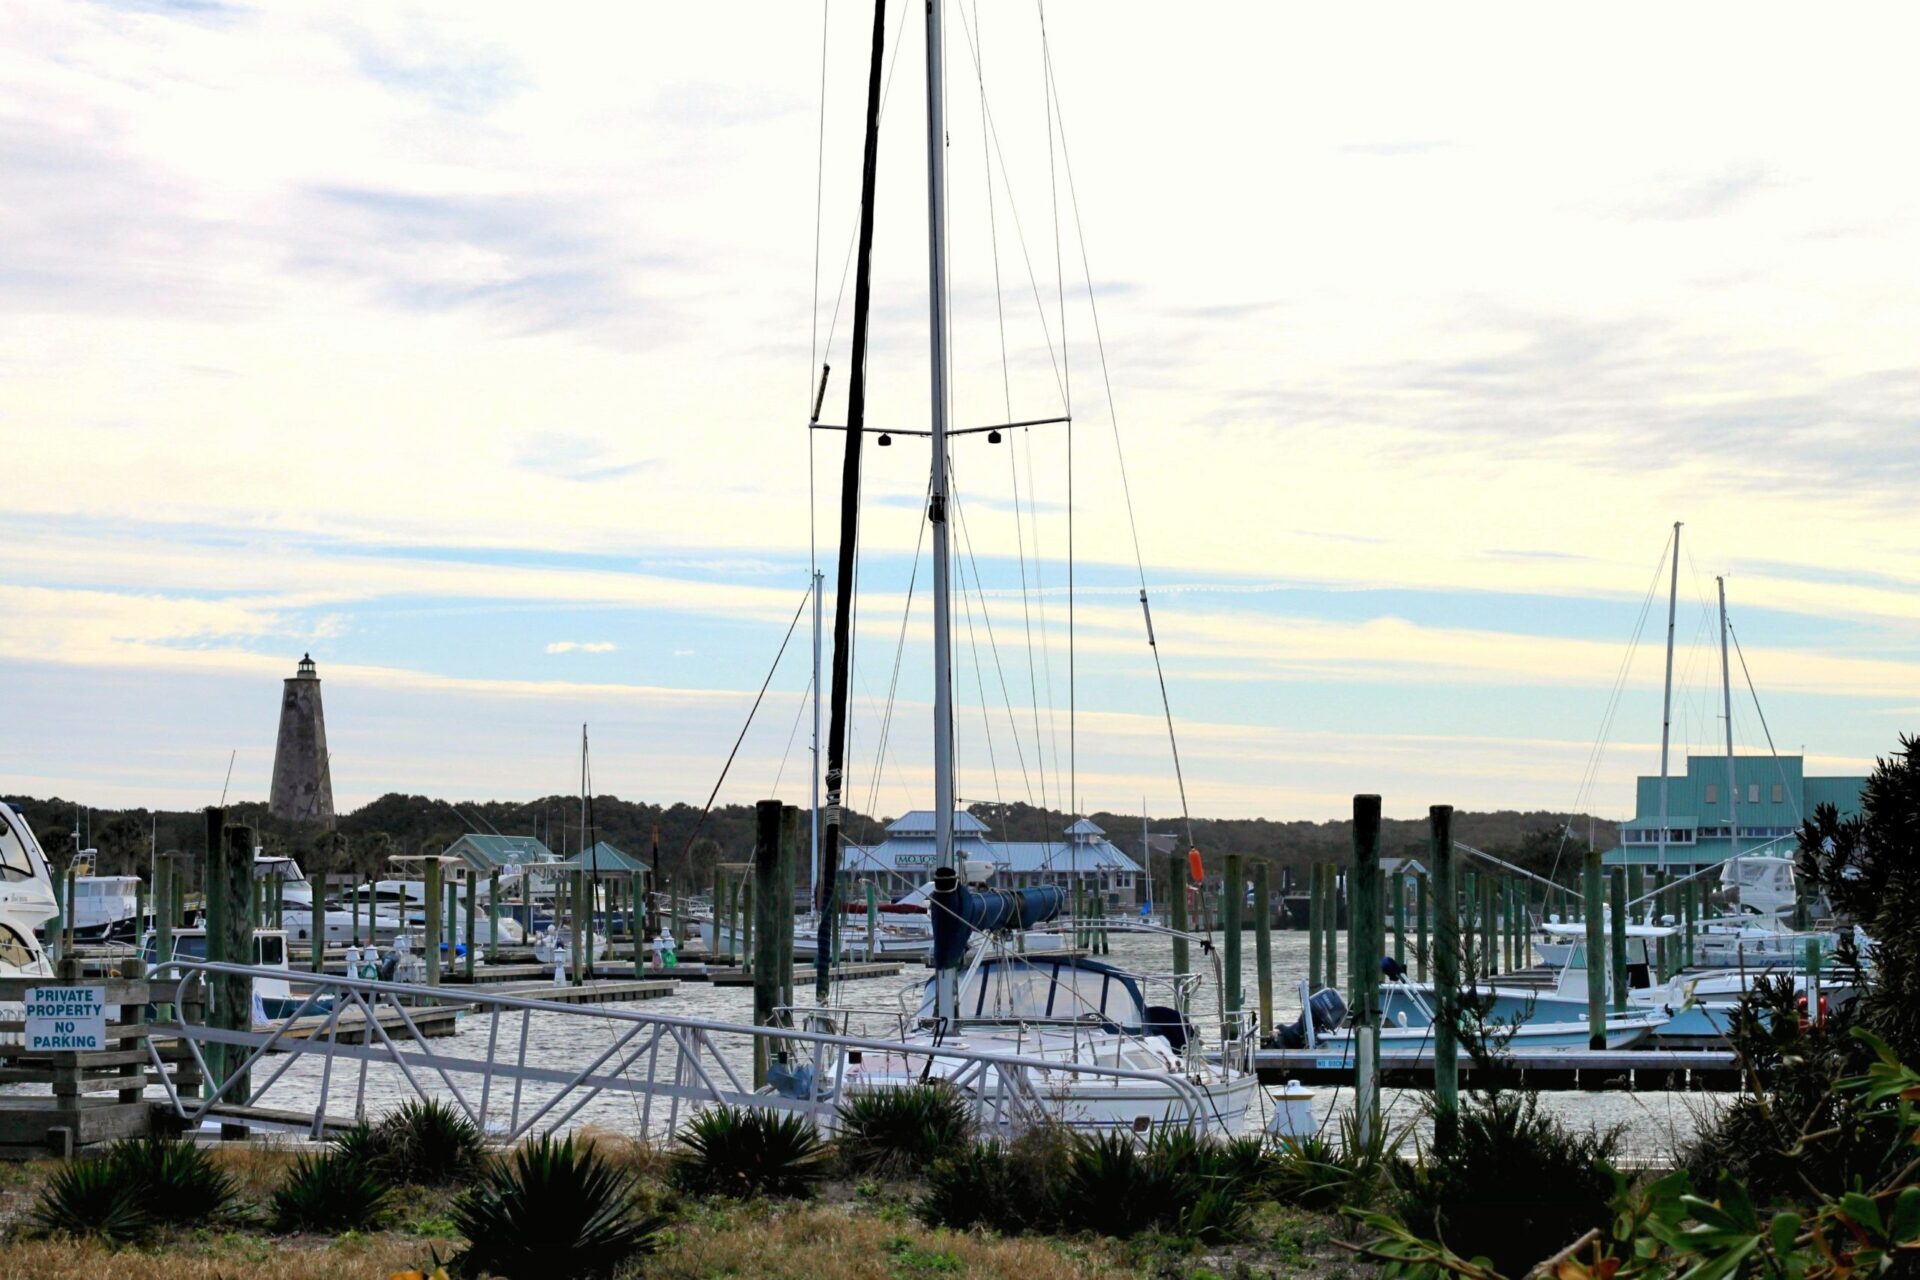 Visiting Bald Head Island, NC (even in the winter)